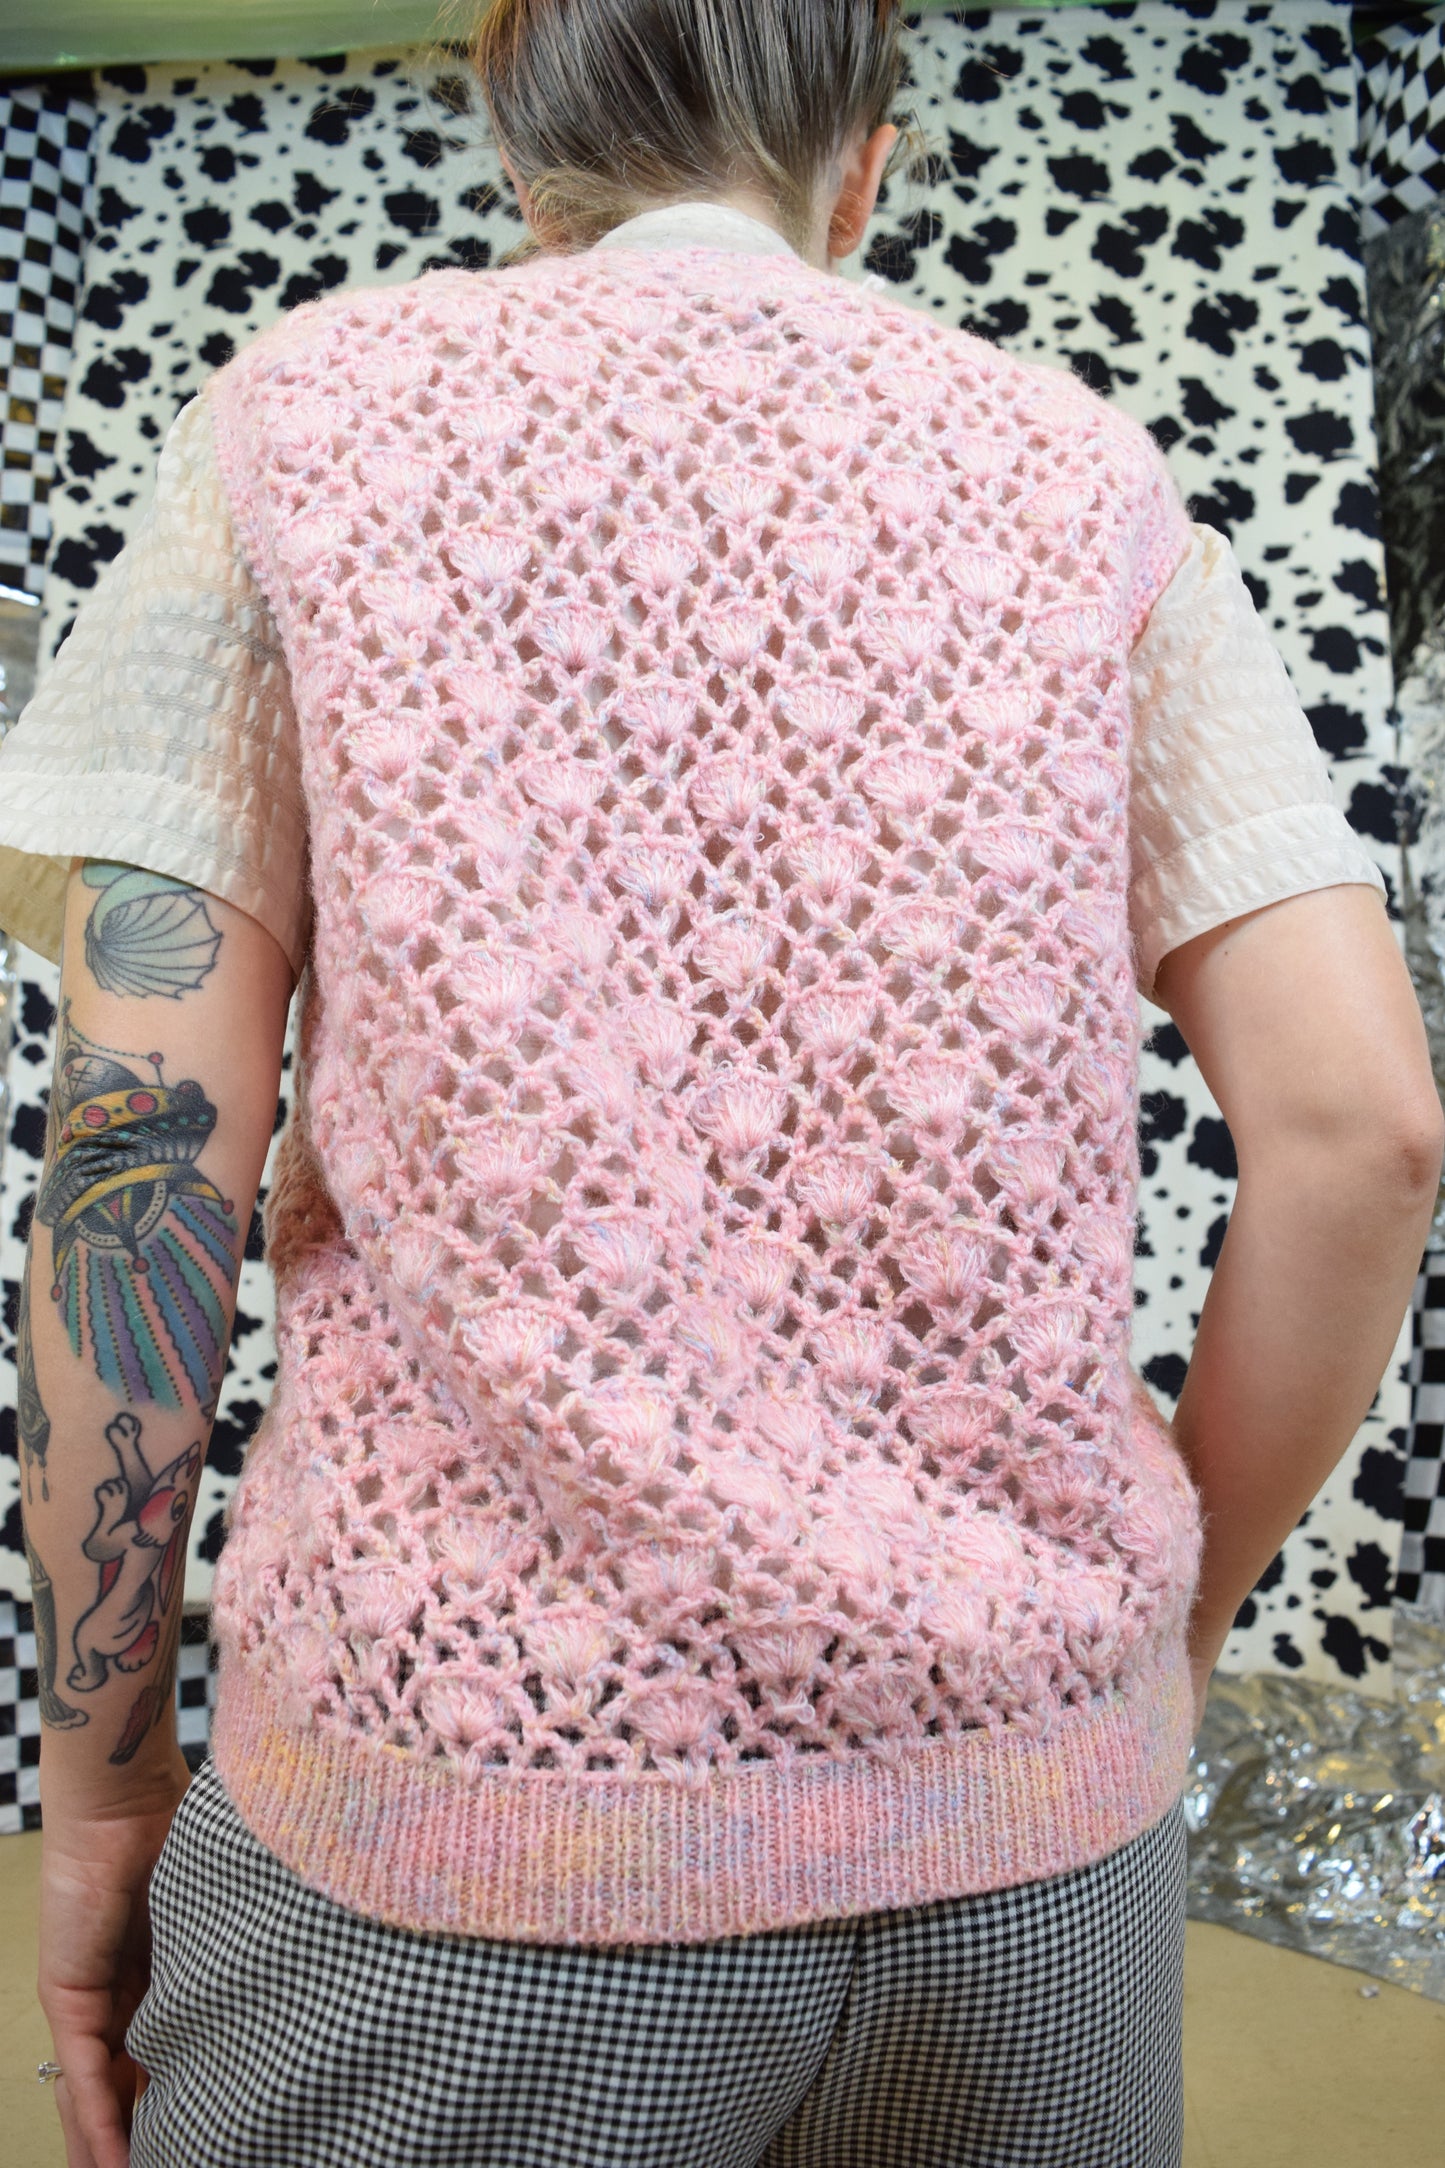 90s SEASHELL KNITTED PINK VEST - M/L